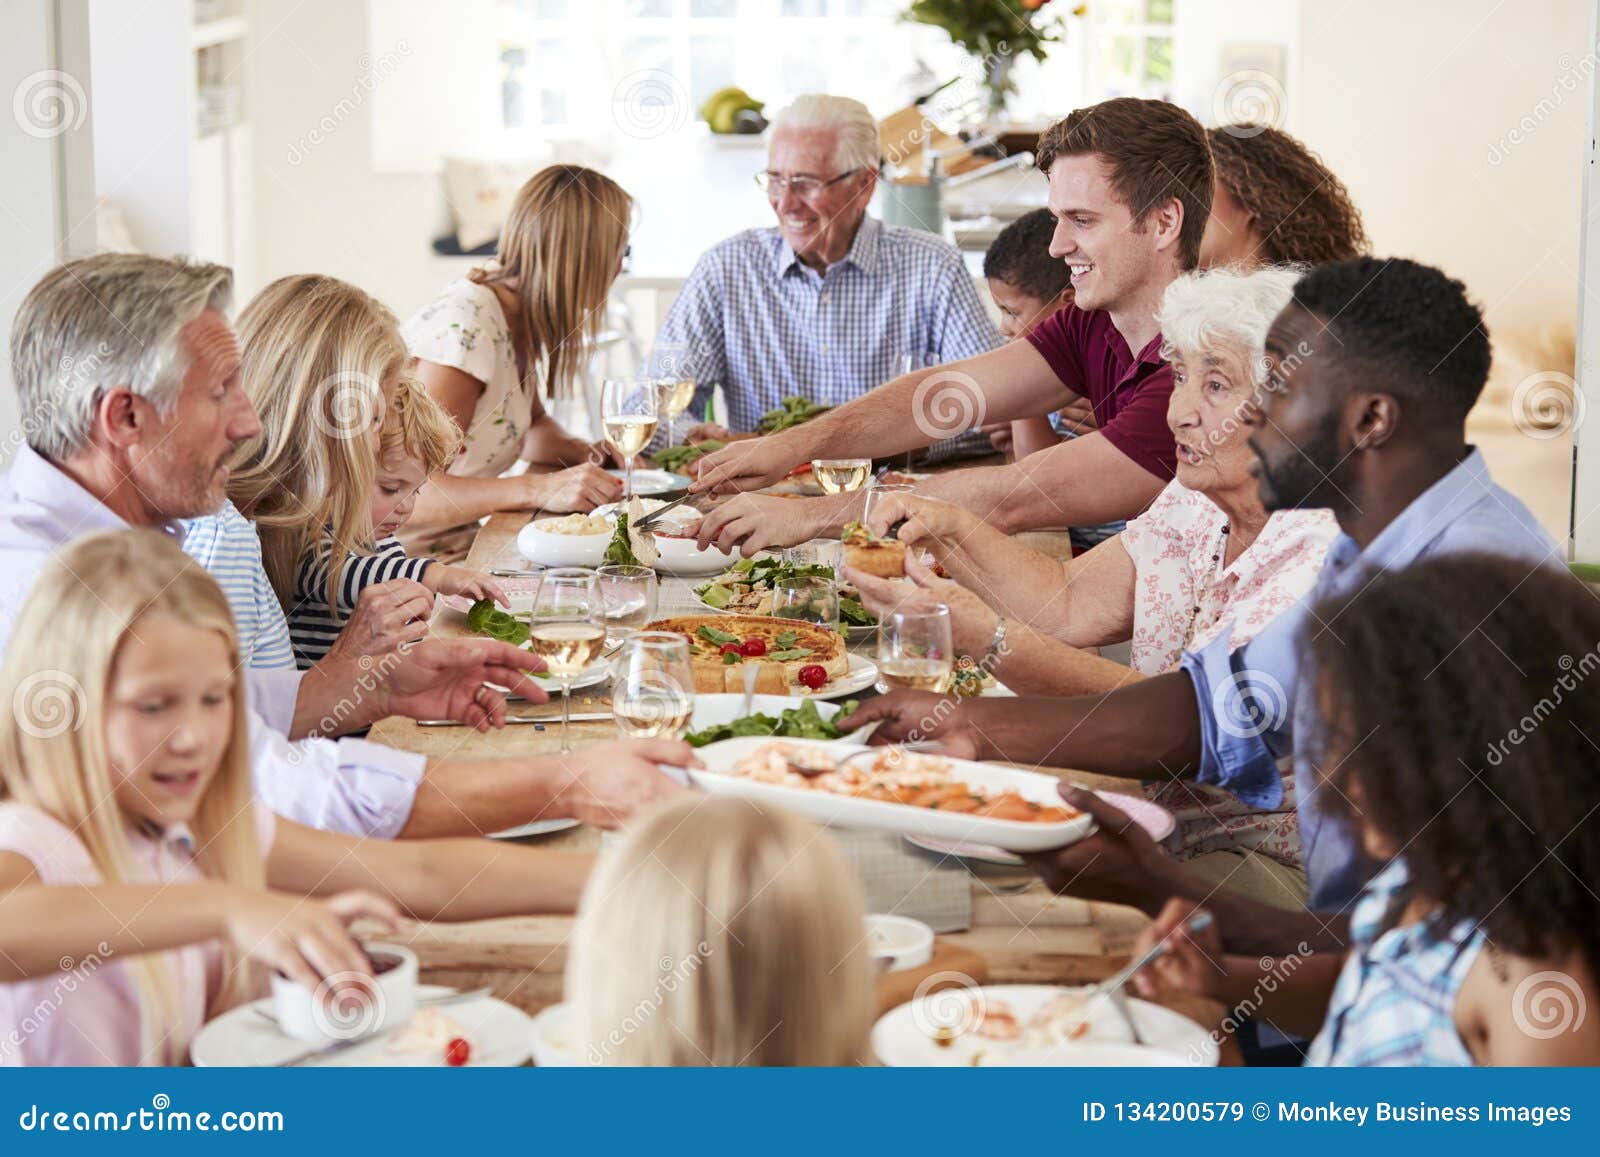 group of multi-generation family and friends sitting around table and enjoying meal